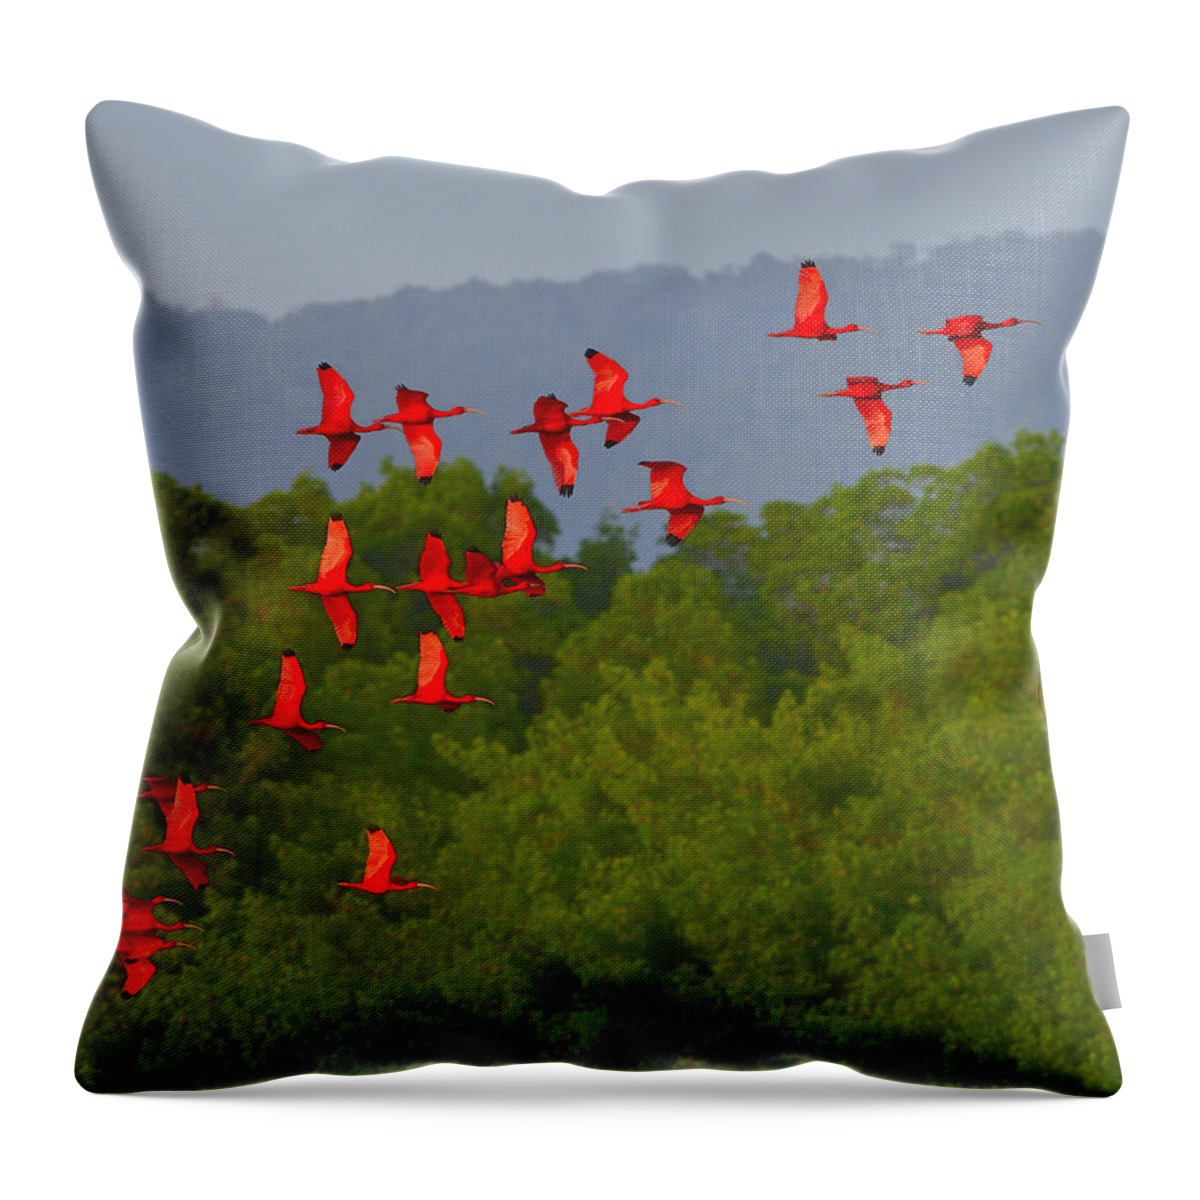 Scarlet Ibis Throw Pillow featuring the photograph Scarlet Ibis by Tony Beck